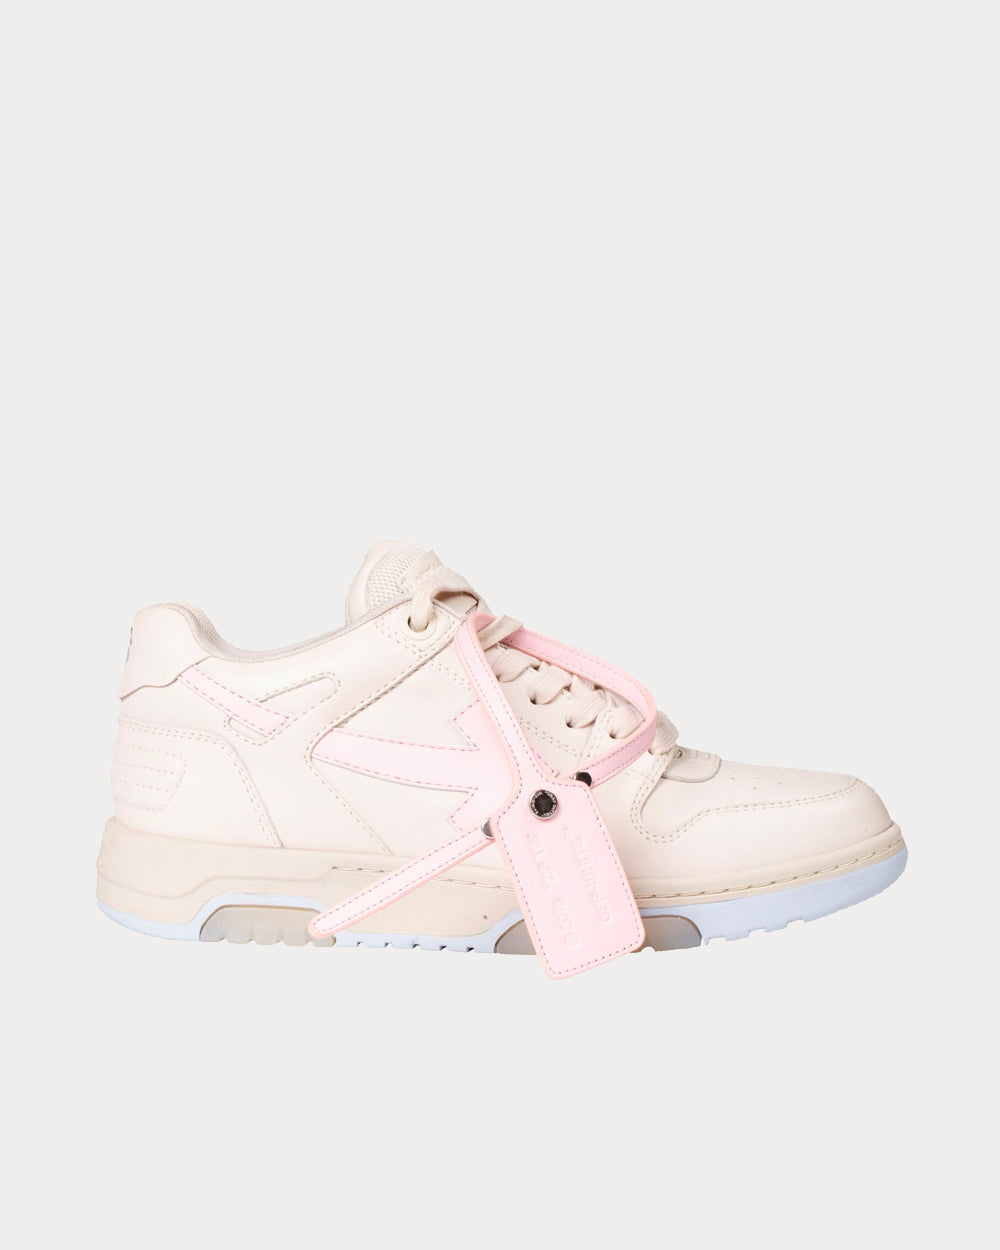 OOO Out of Office Pink / White Low Top Sneakers